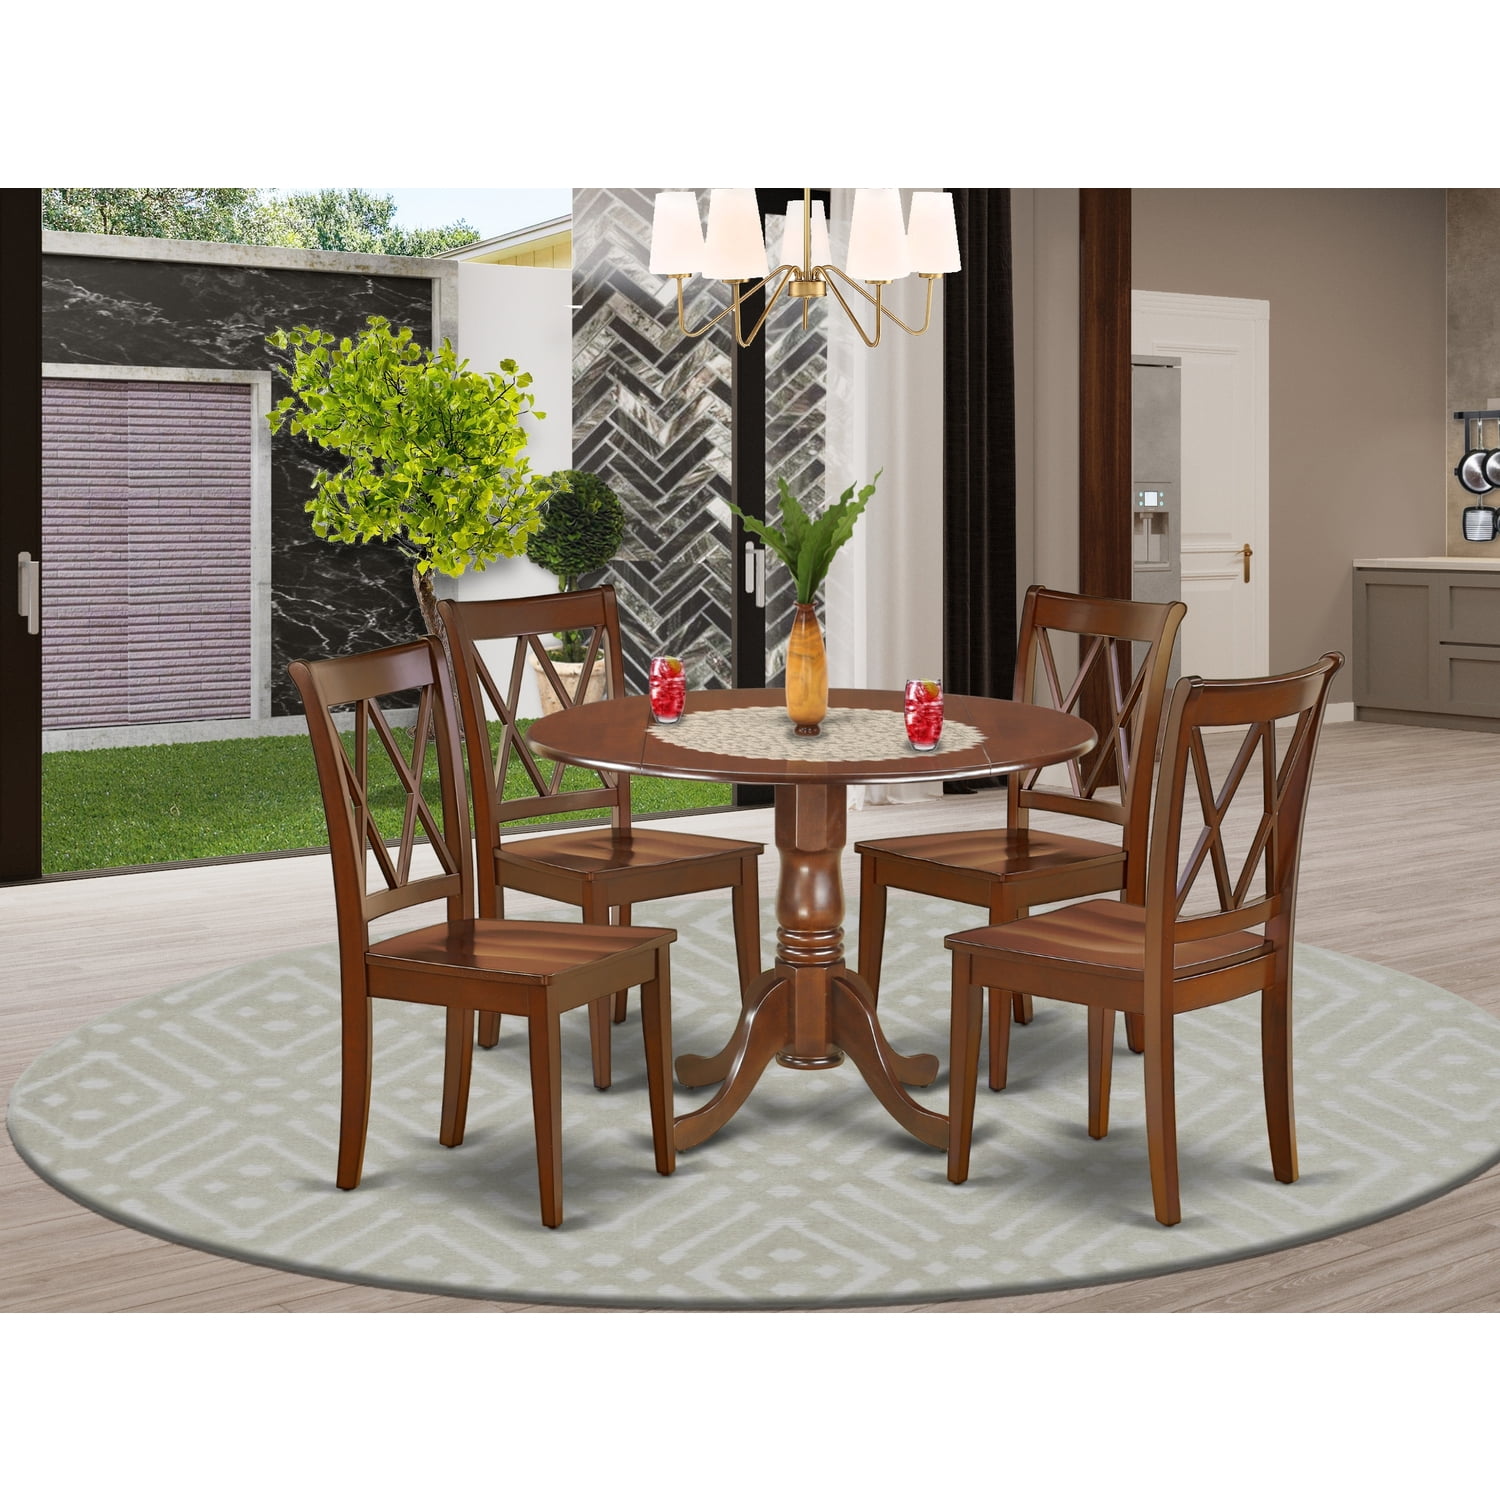 East West Furniture DLCL5-MAH-W 5PC Round 42 inch Table with Two 9-Inch  Drop Leaves and 4 Double X back Chairs 